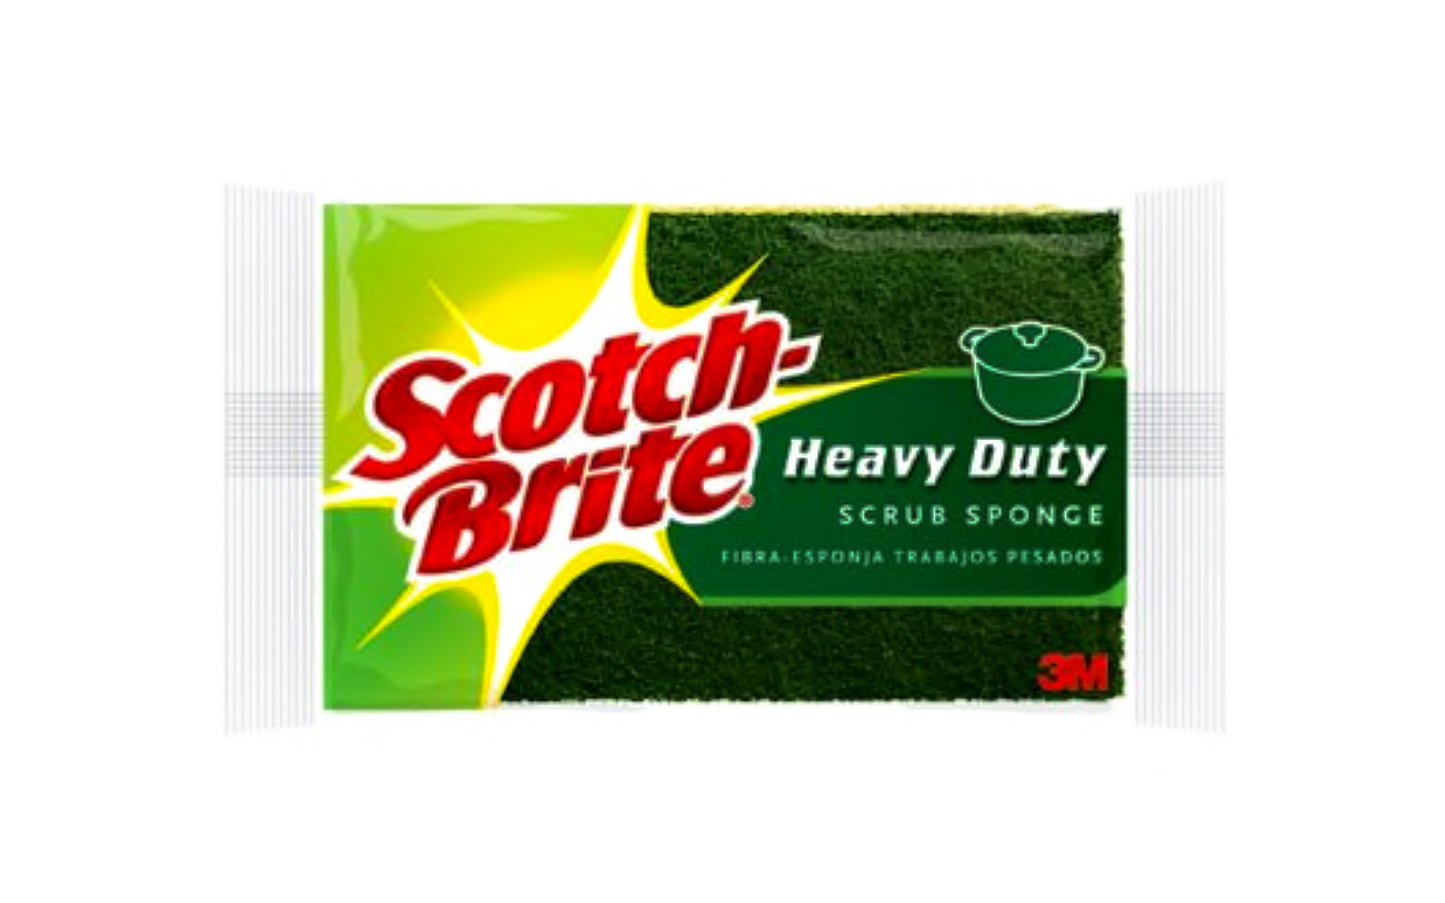 3M Scotch-Brite Heavy Duty Scrub Sponge ~  Removes Tough, Baked-On Messes 50% Faster Than Other Competitive Sponges. Great For The Kitchen, Garage & Outdoors. 021200000003. Model 425.